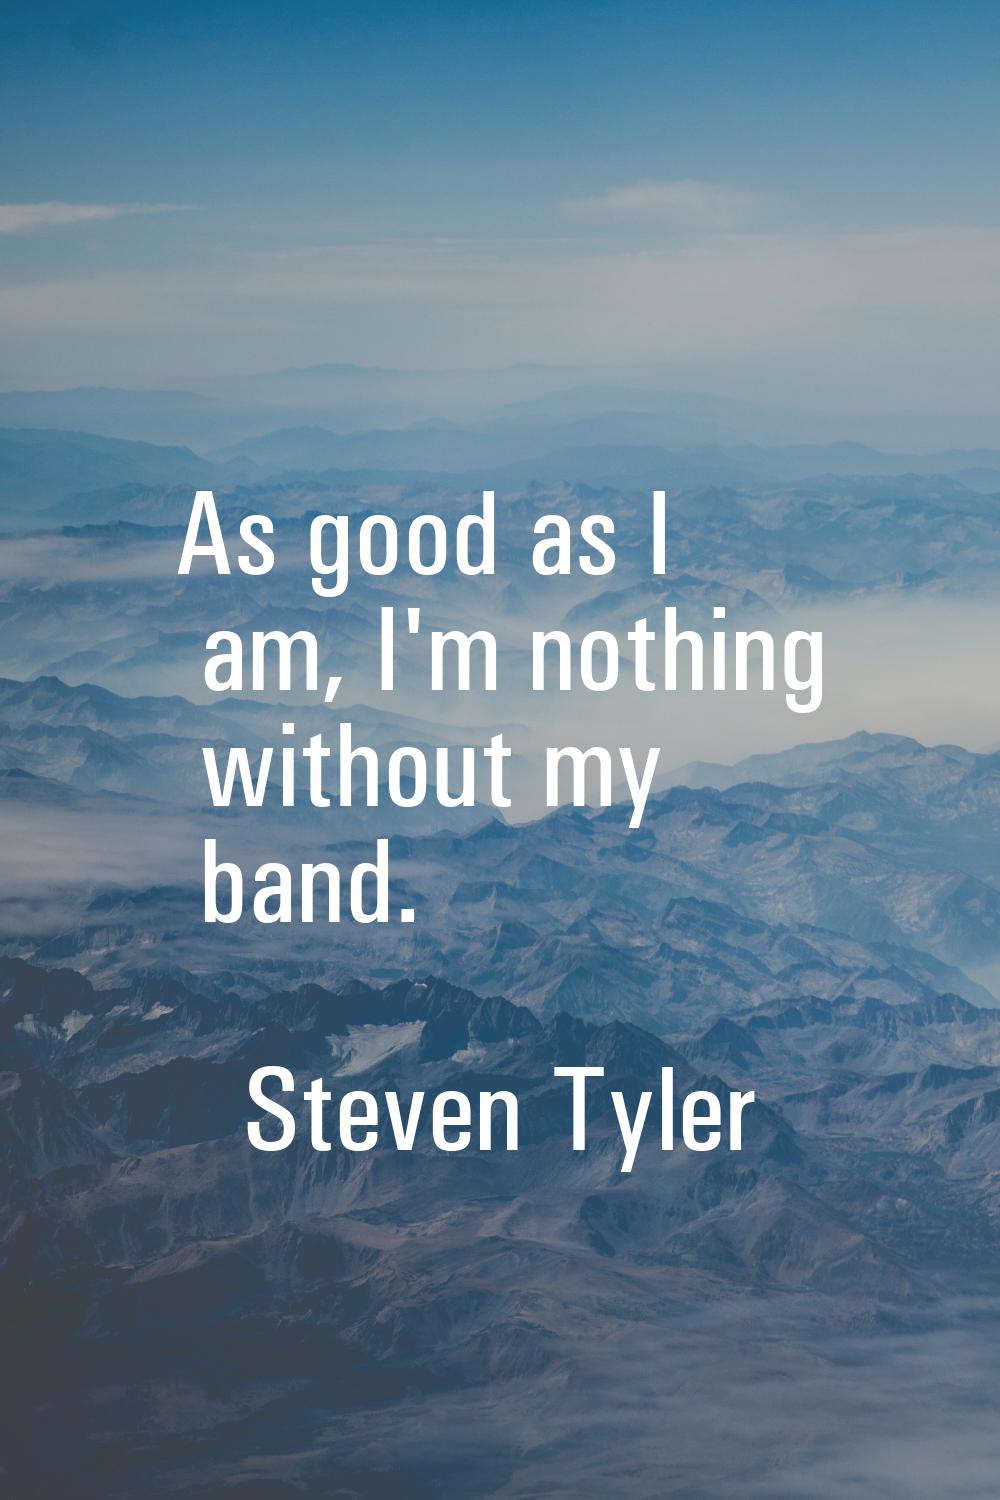 As good as I am, I'm nothing without my band.